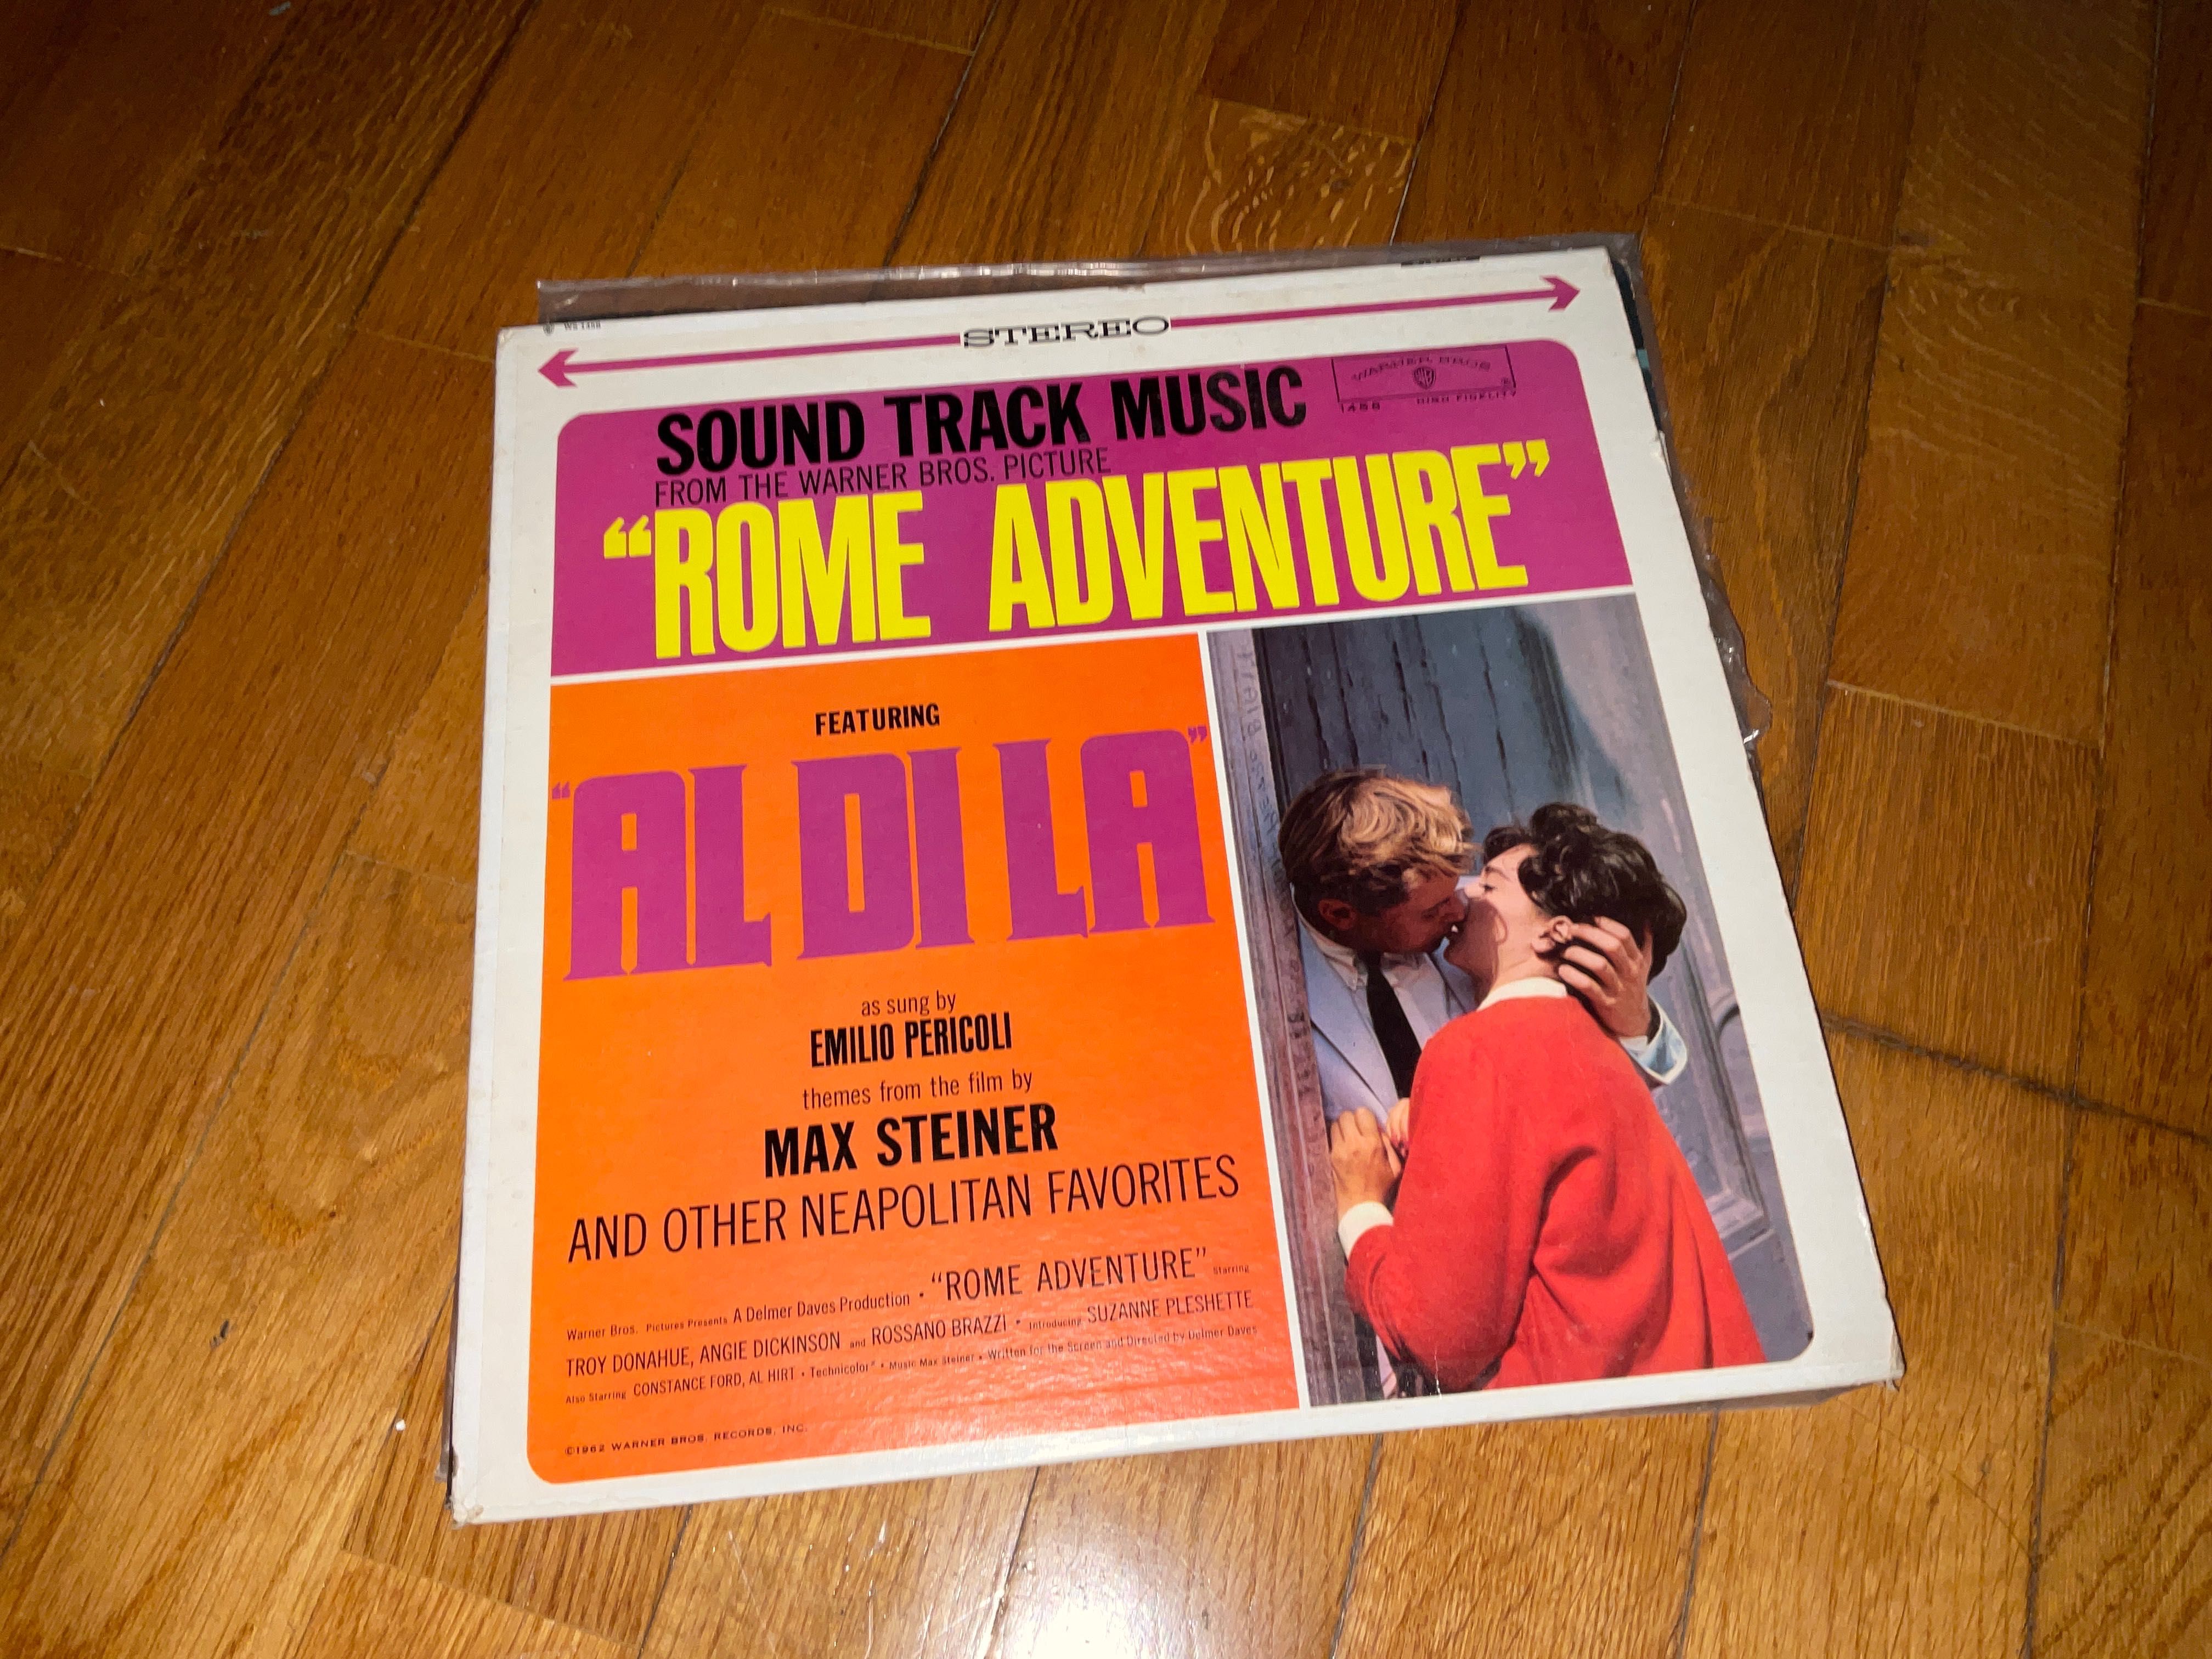 Lp sound Track music from the Warner Bros. Picture - Rome Adventure